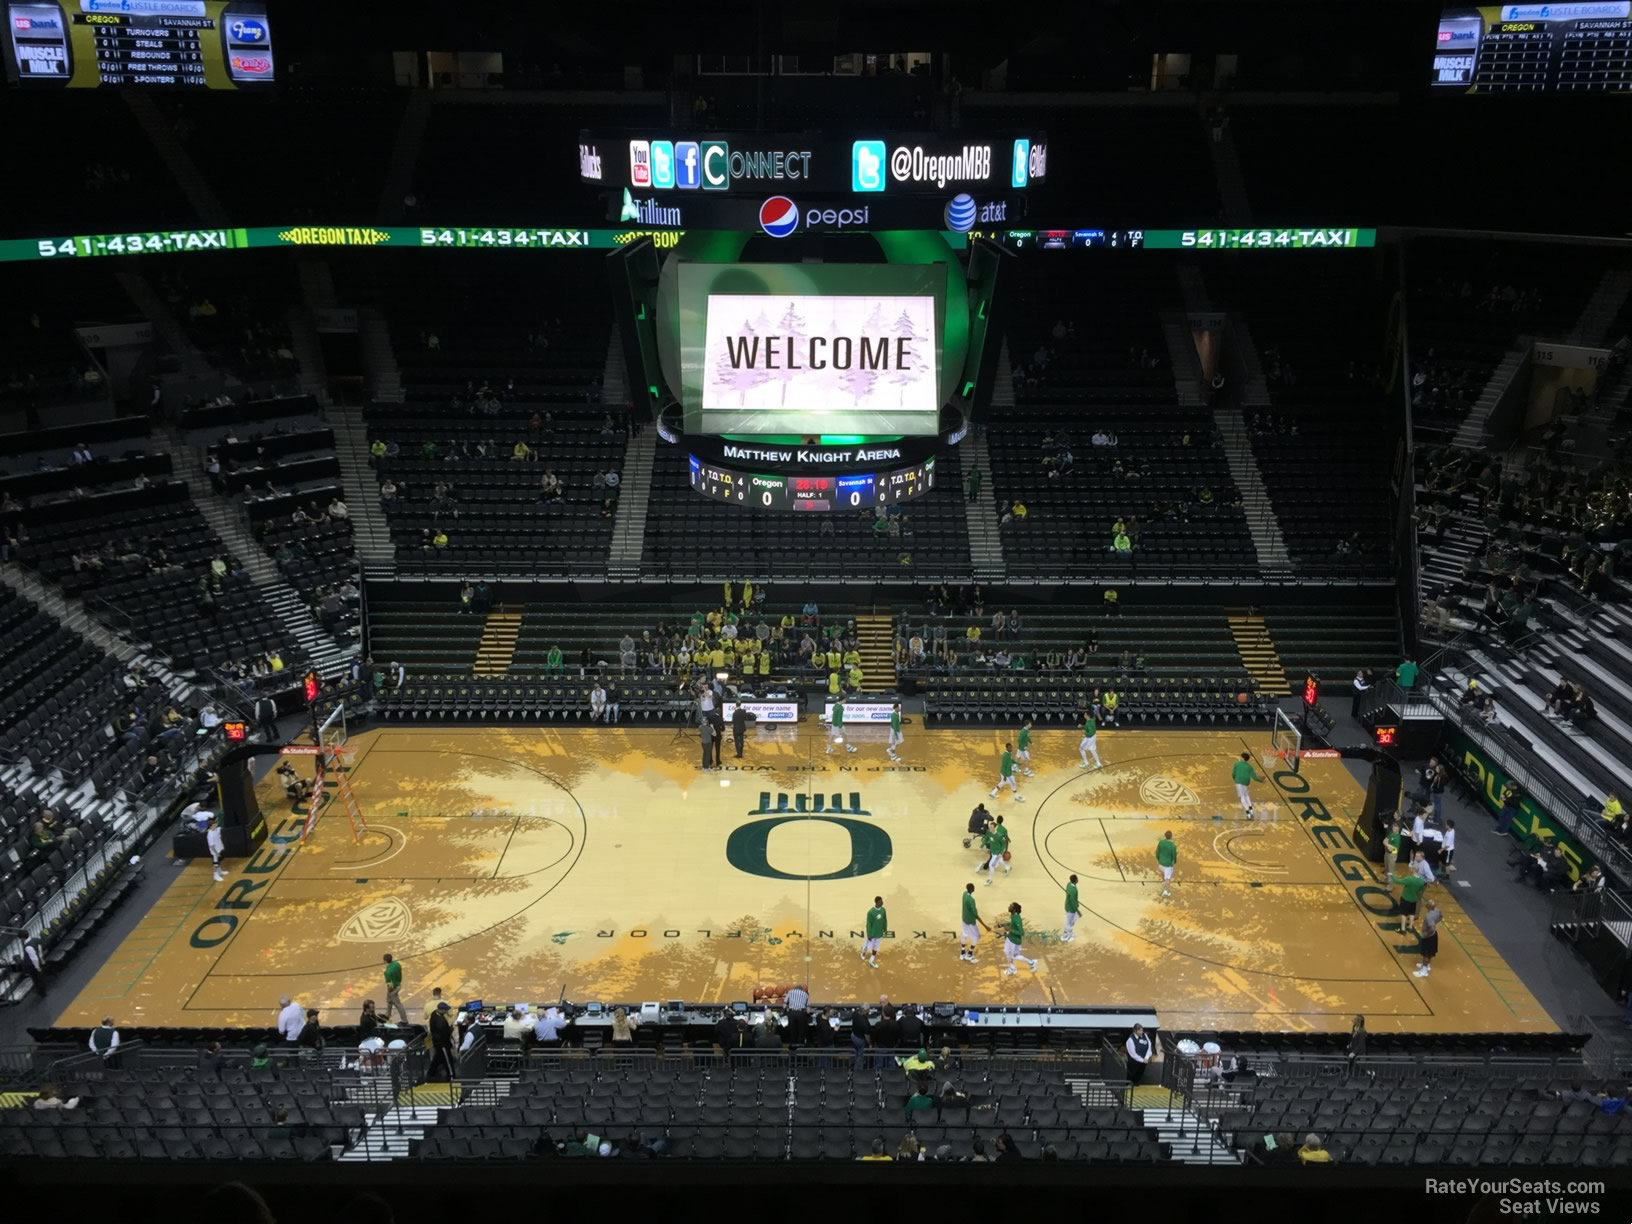 section 203, row f seat view  - matthew knight arena